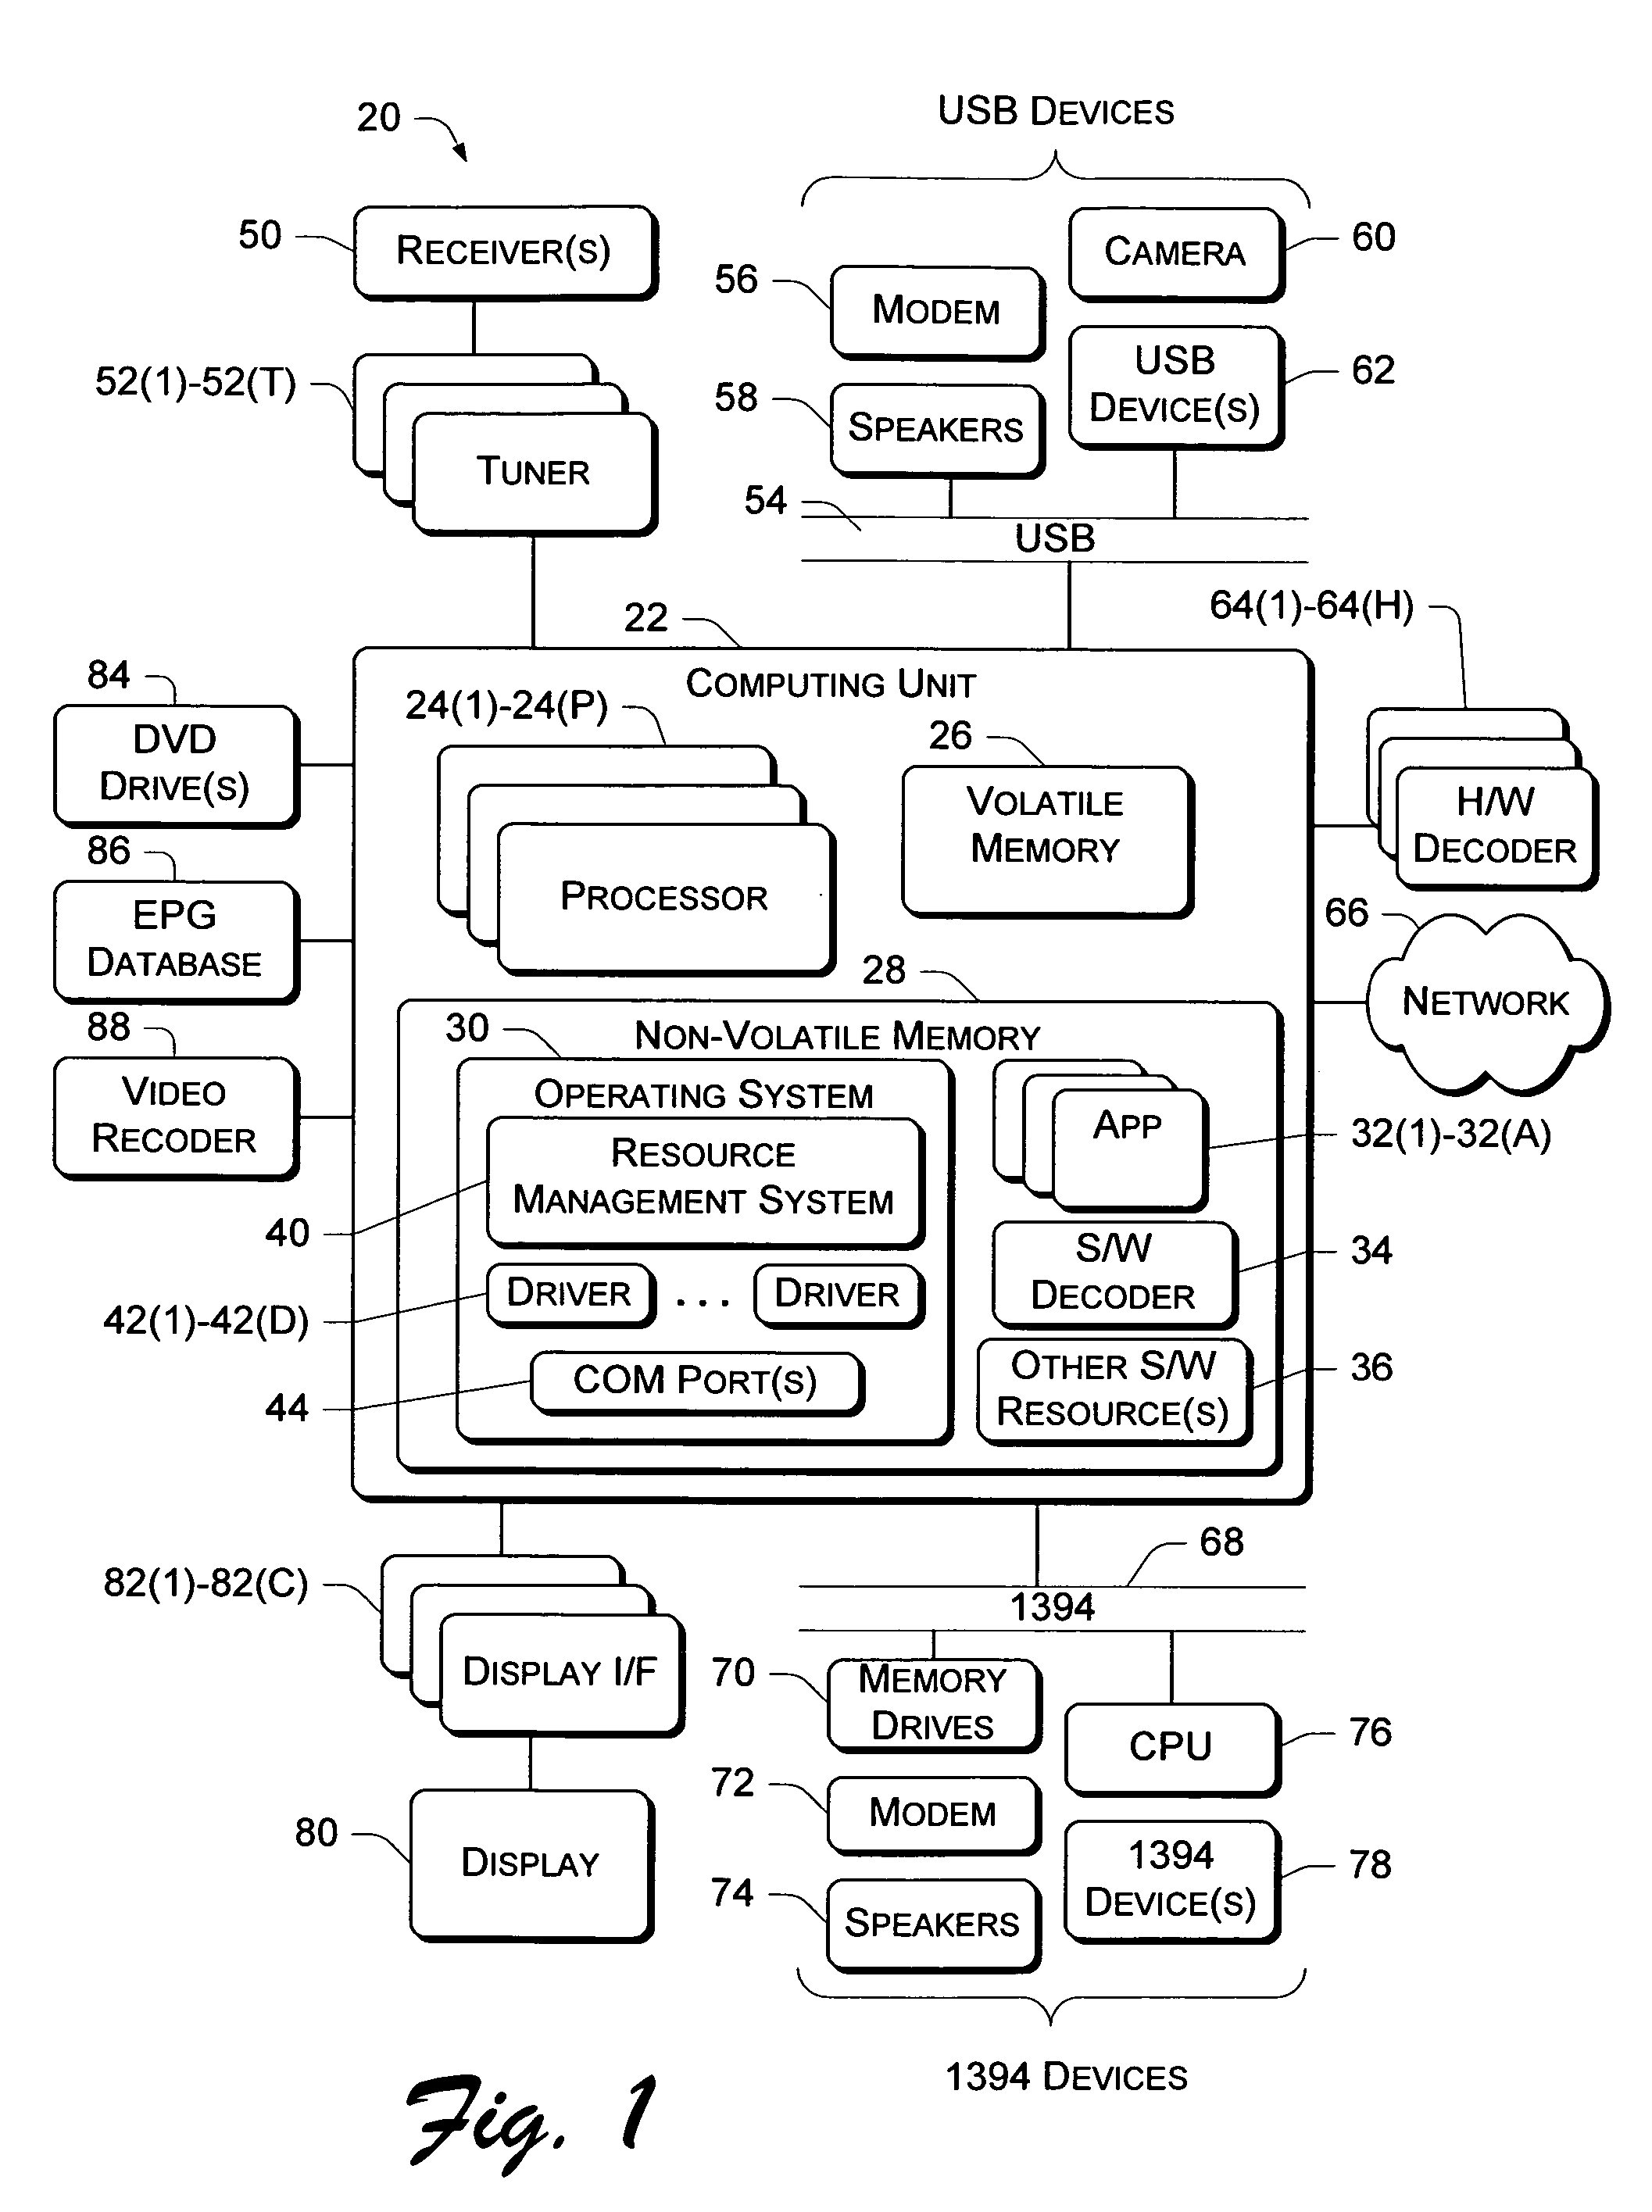 Resource manager architecture